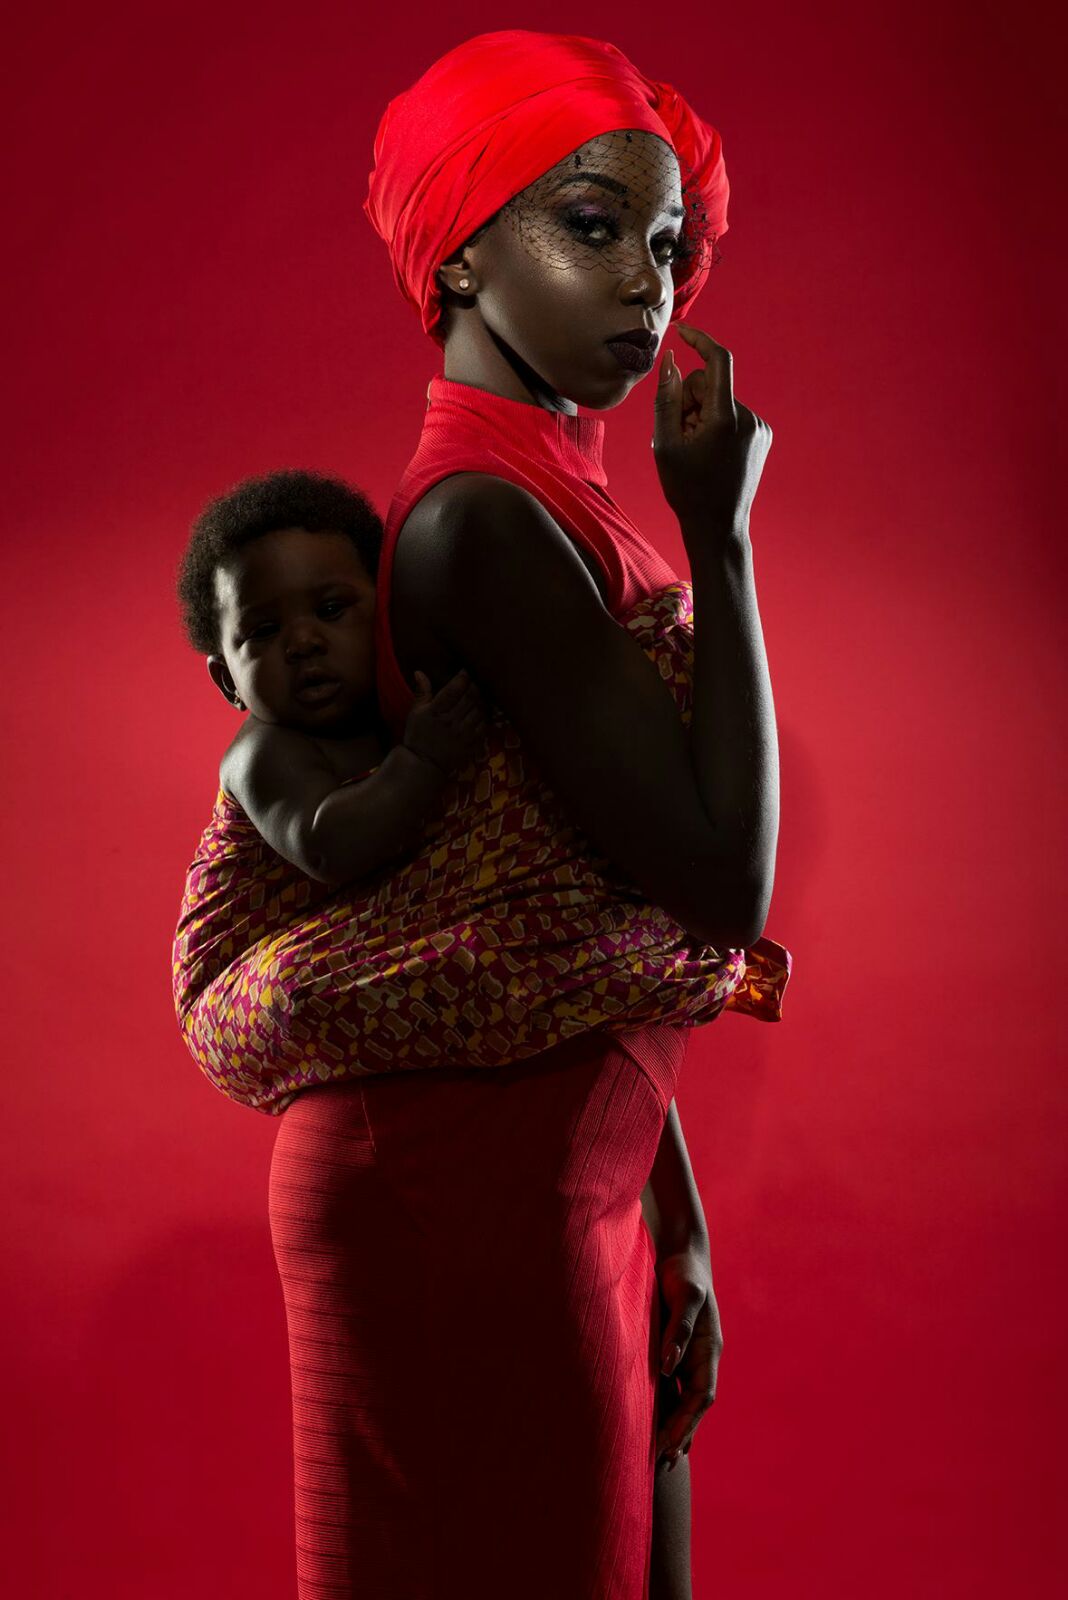 A study in glamour, motherhood and tradition